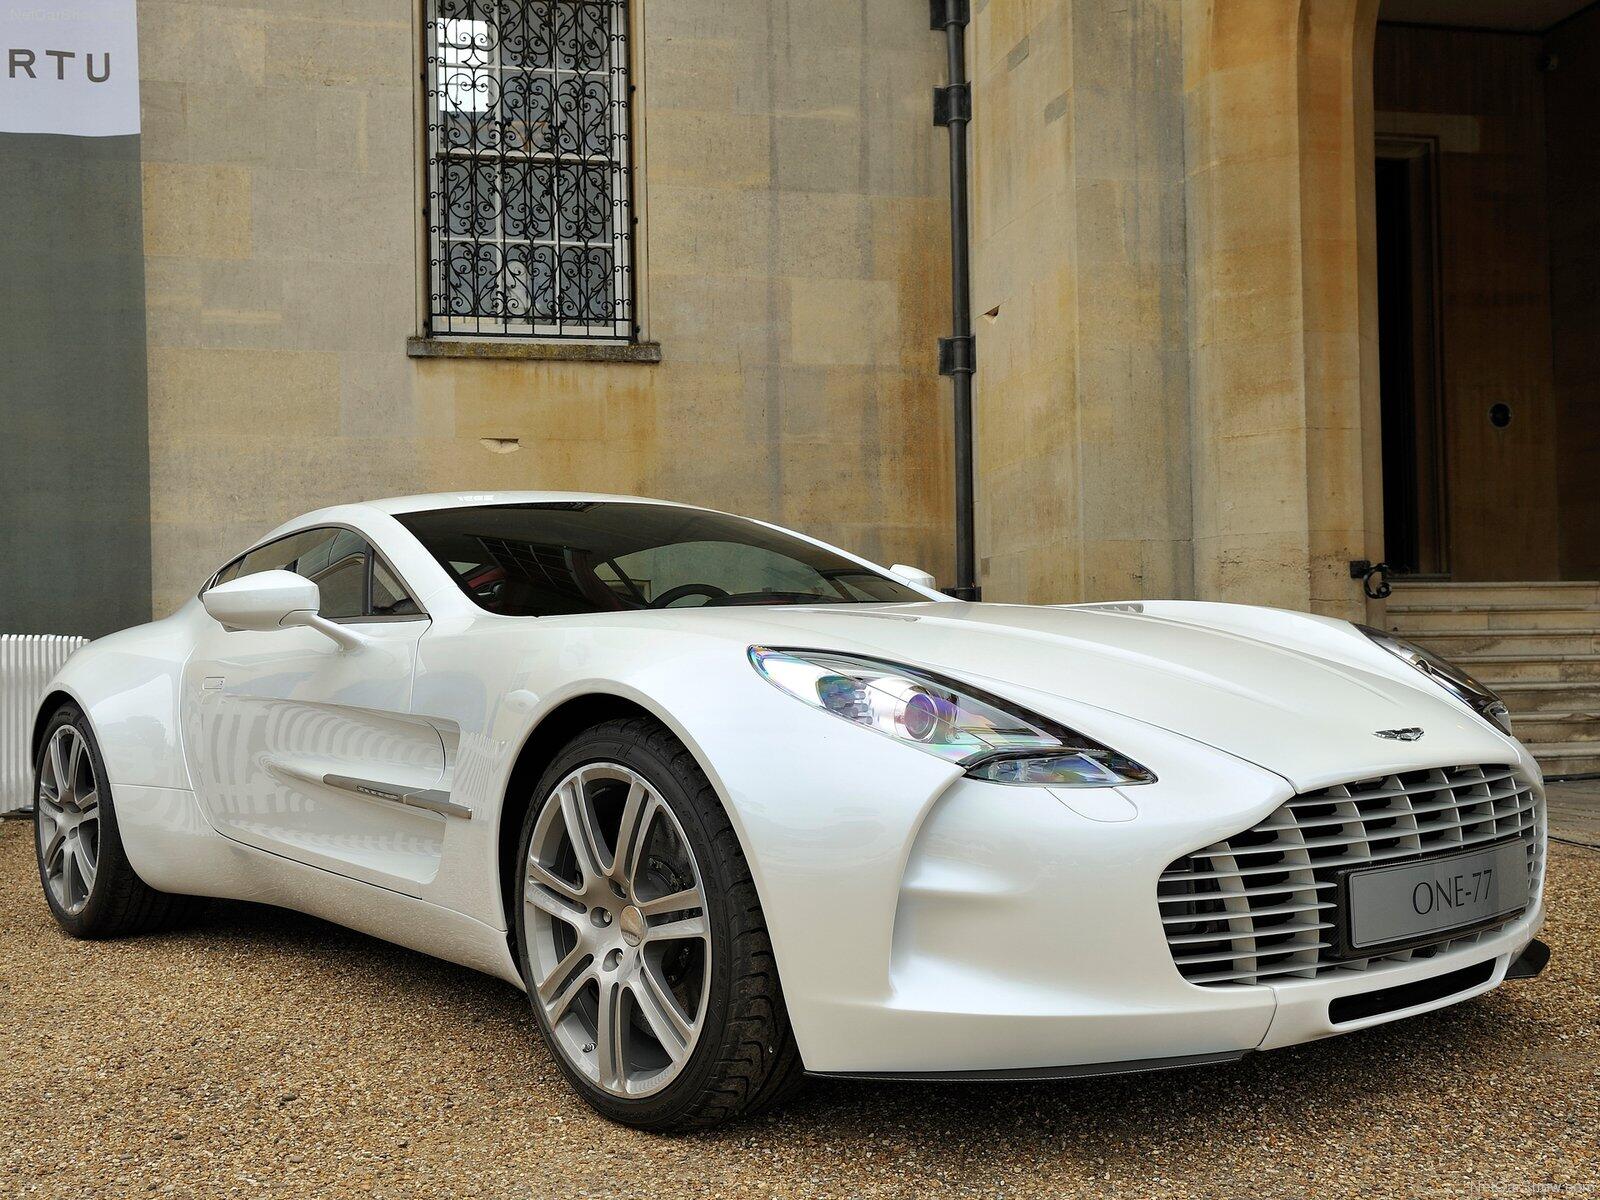 Wallpapers aston martin one-77 cars on the desktop